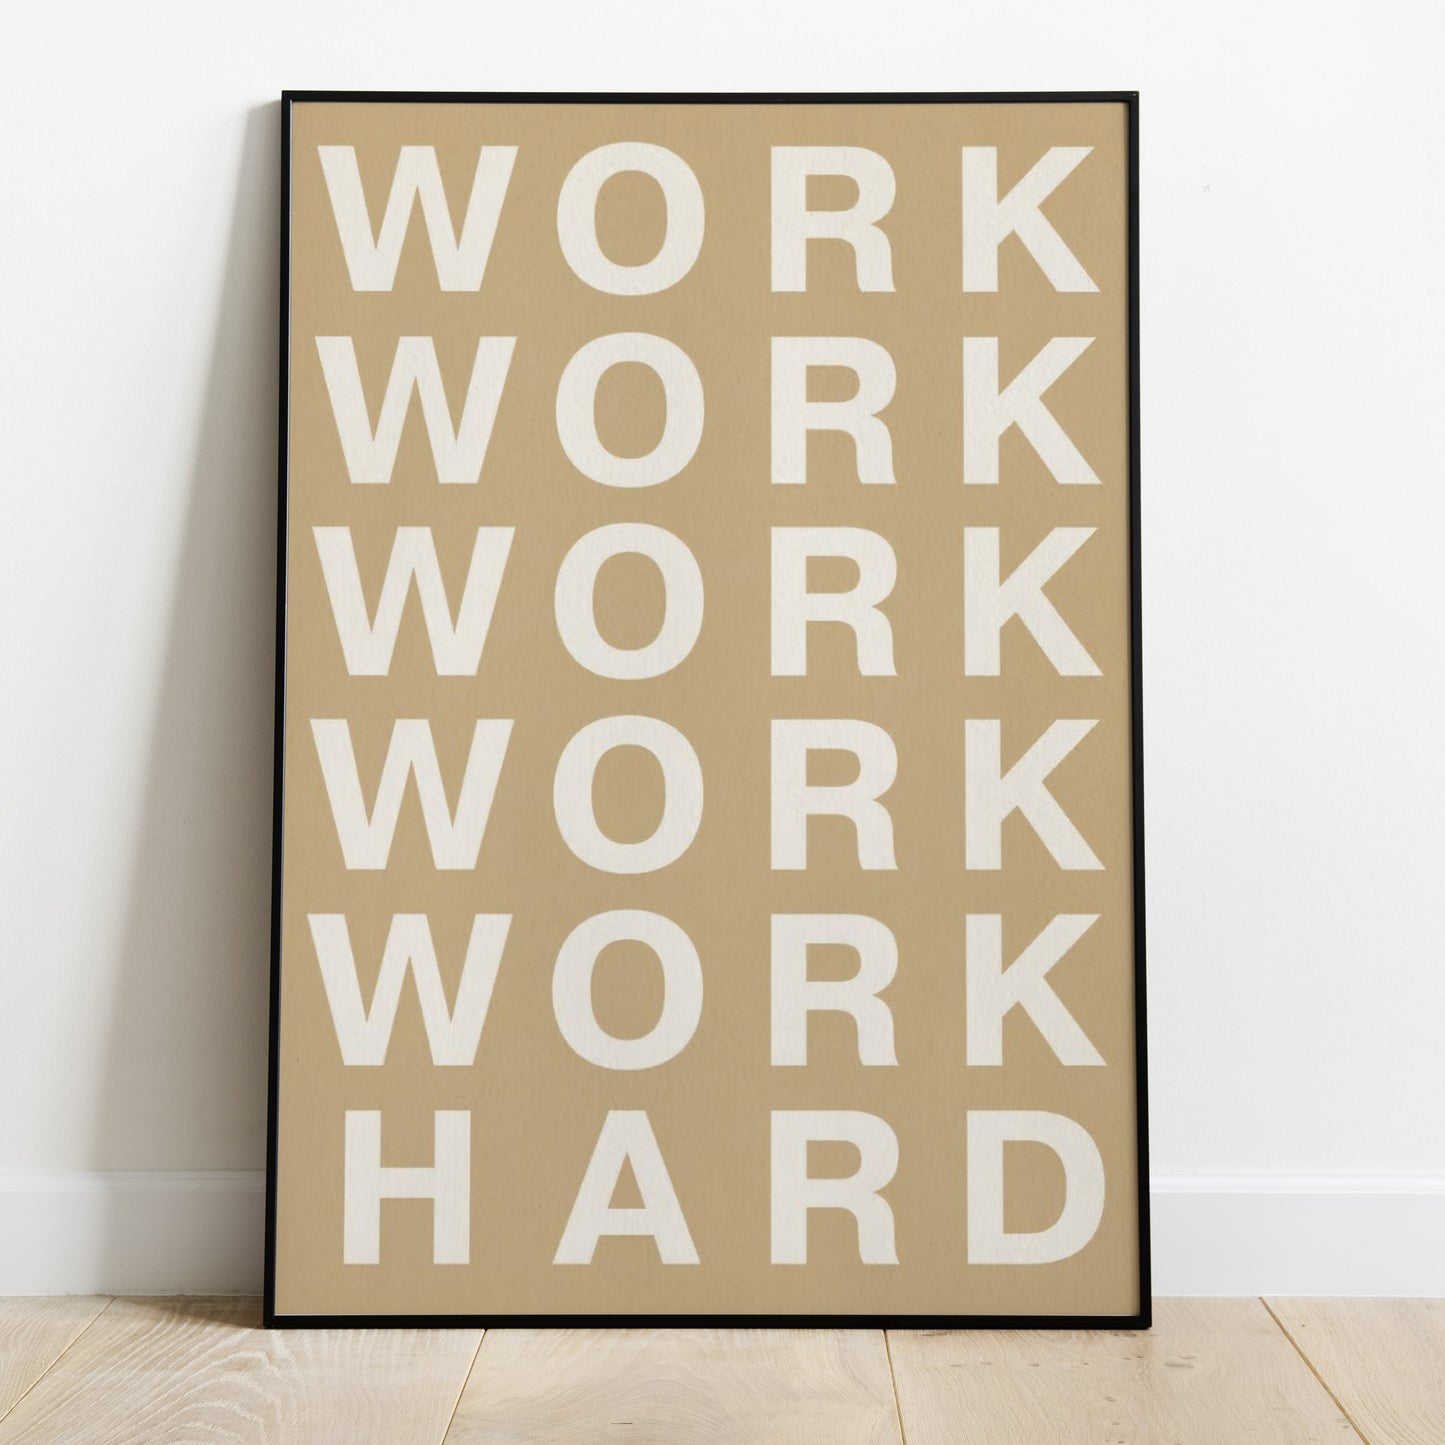 WORK WORK WORK Wall Art Poster for Home Office